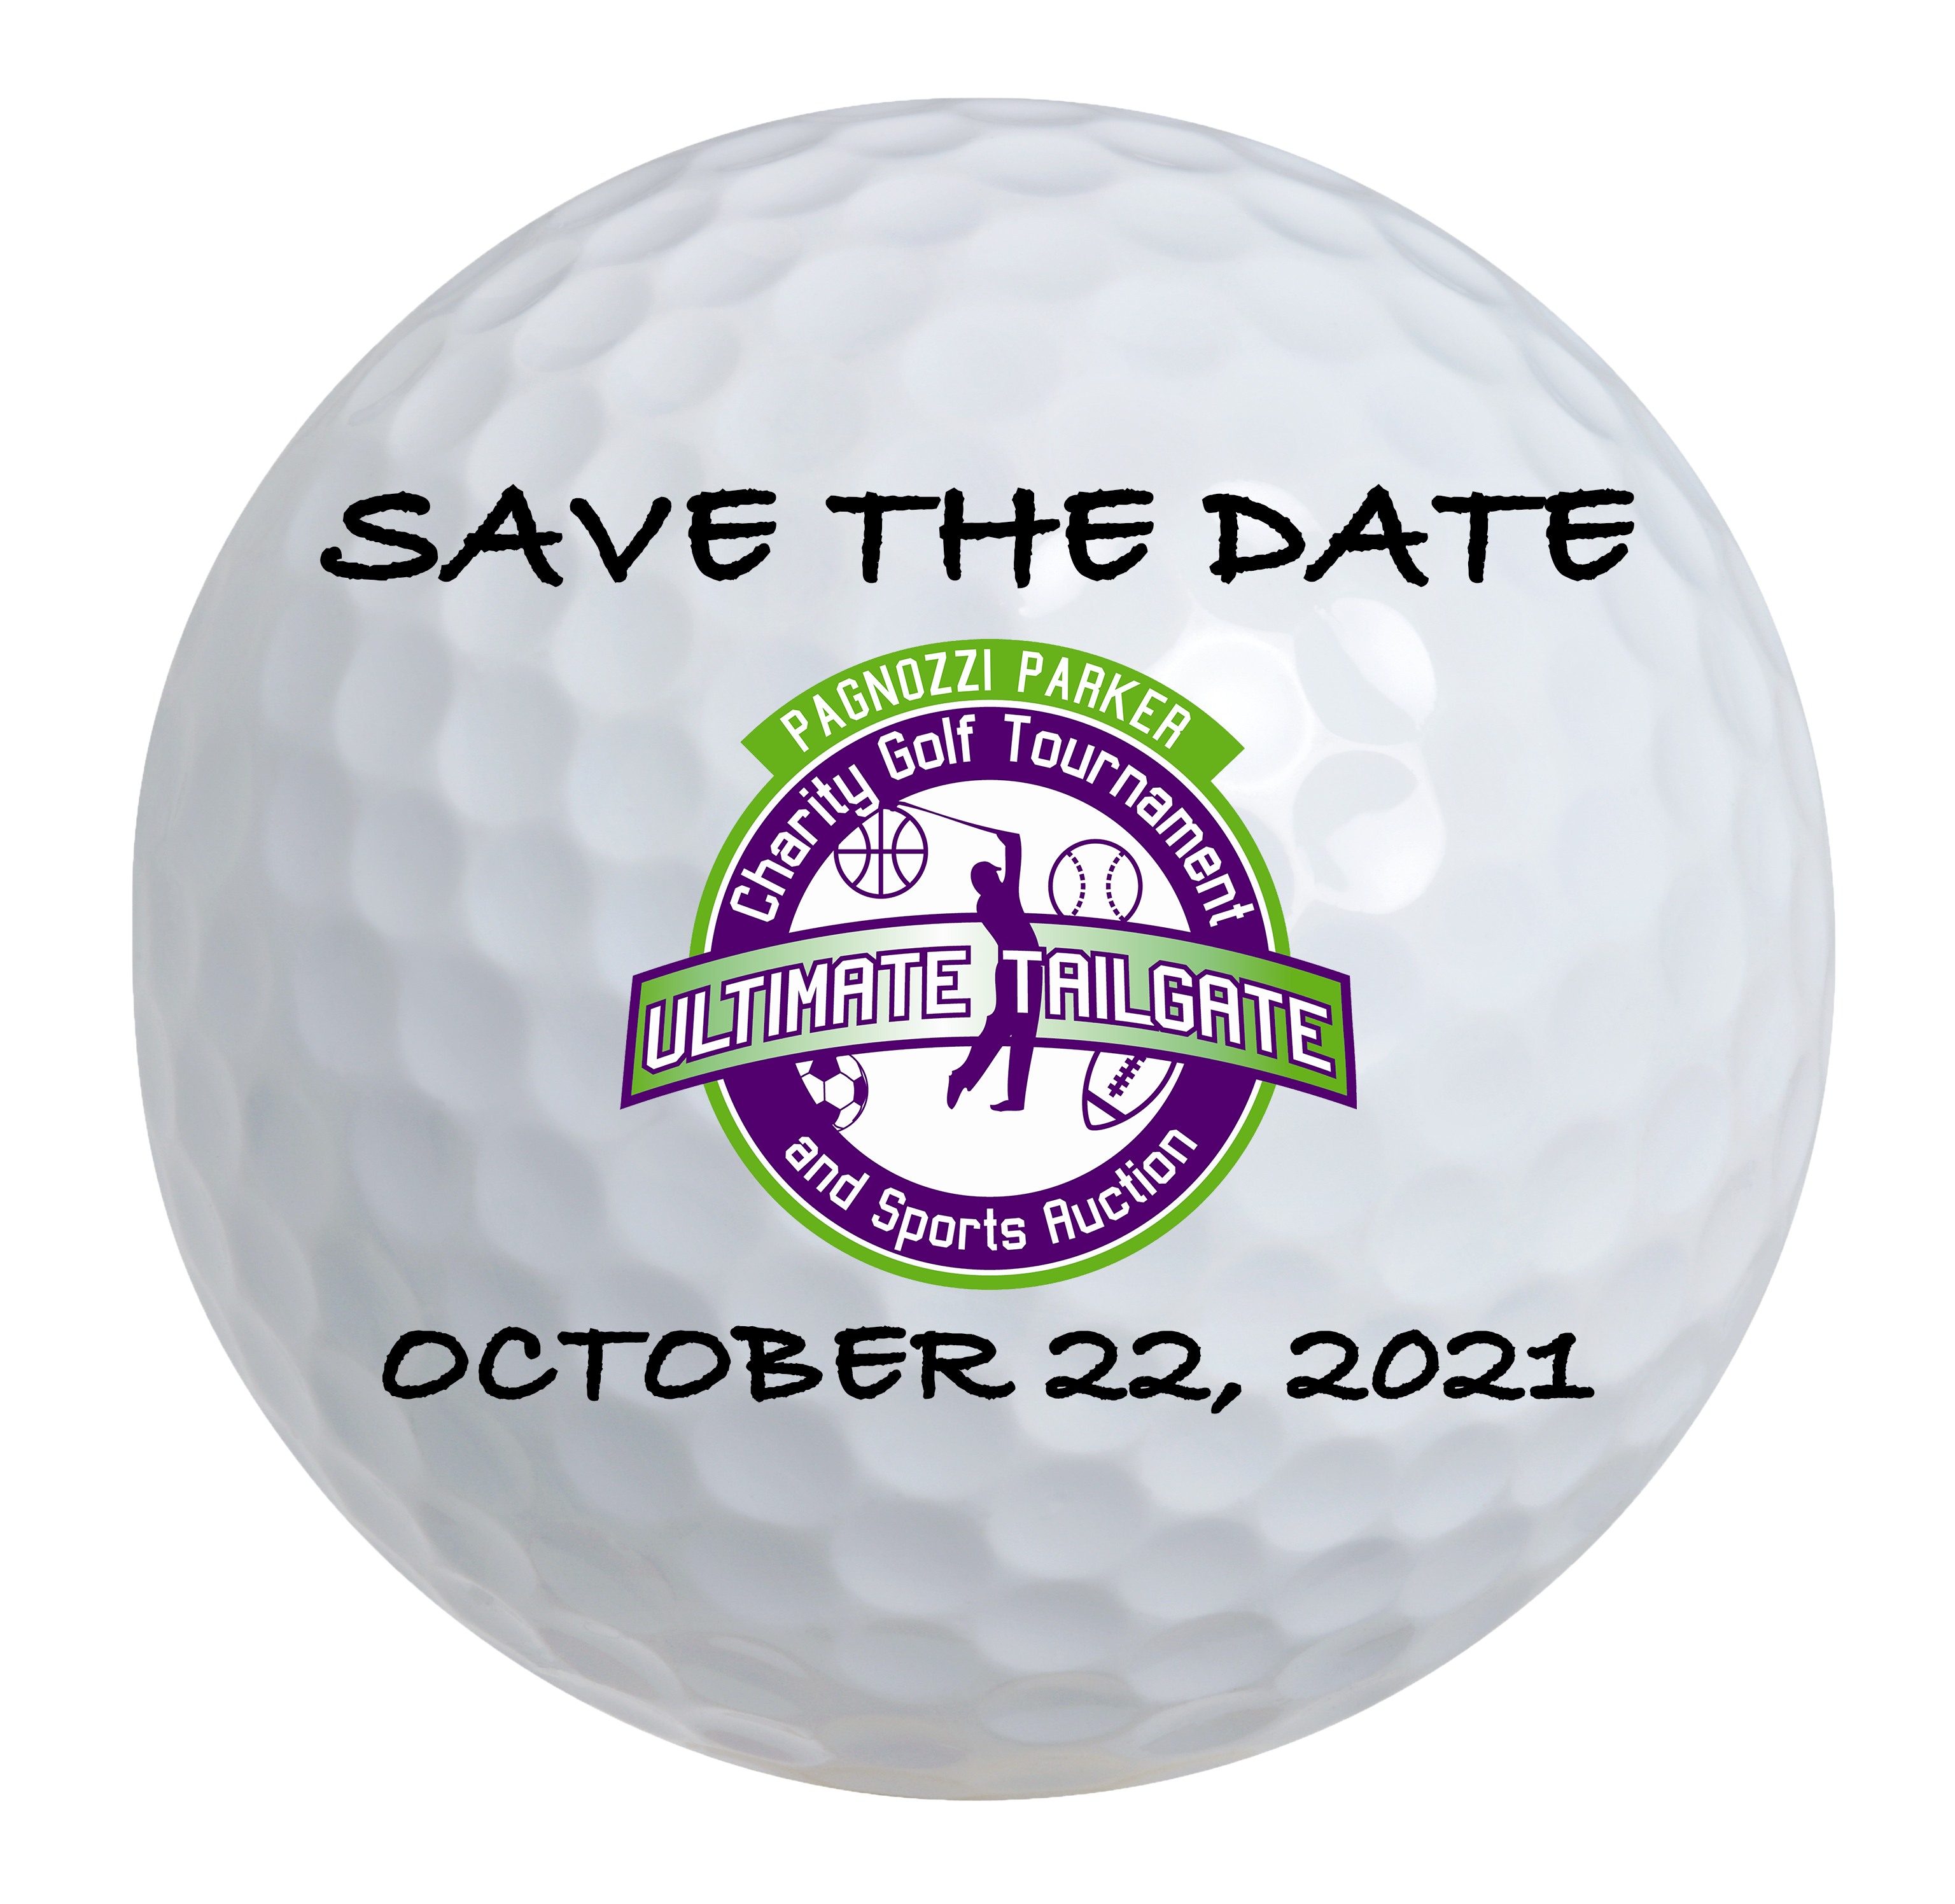 30th Annual Pagnozzi Parker Charity Golf Tournament, Ultimate Tailgate & Auction